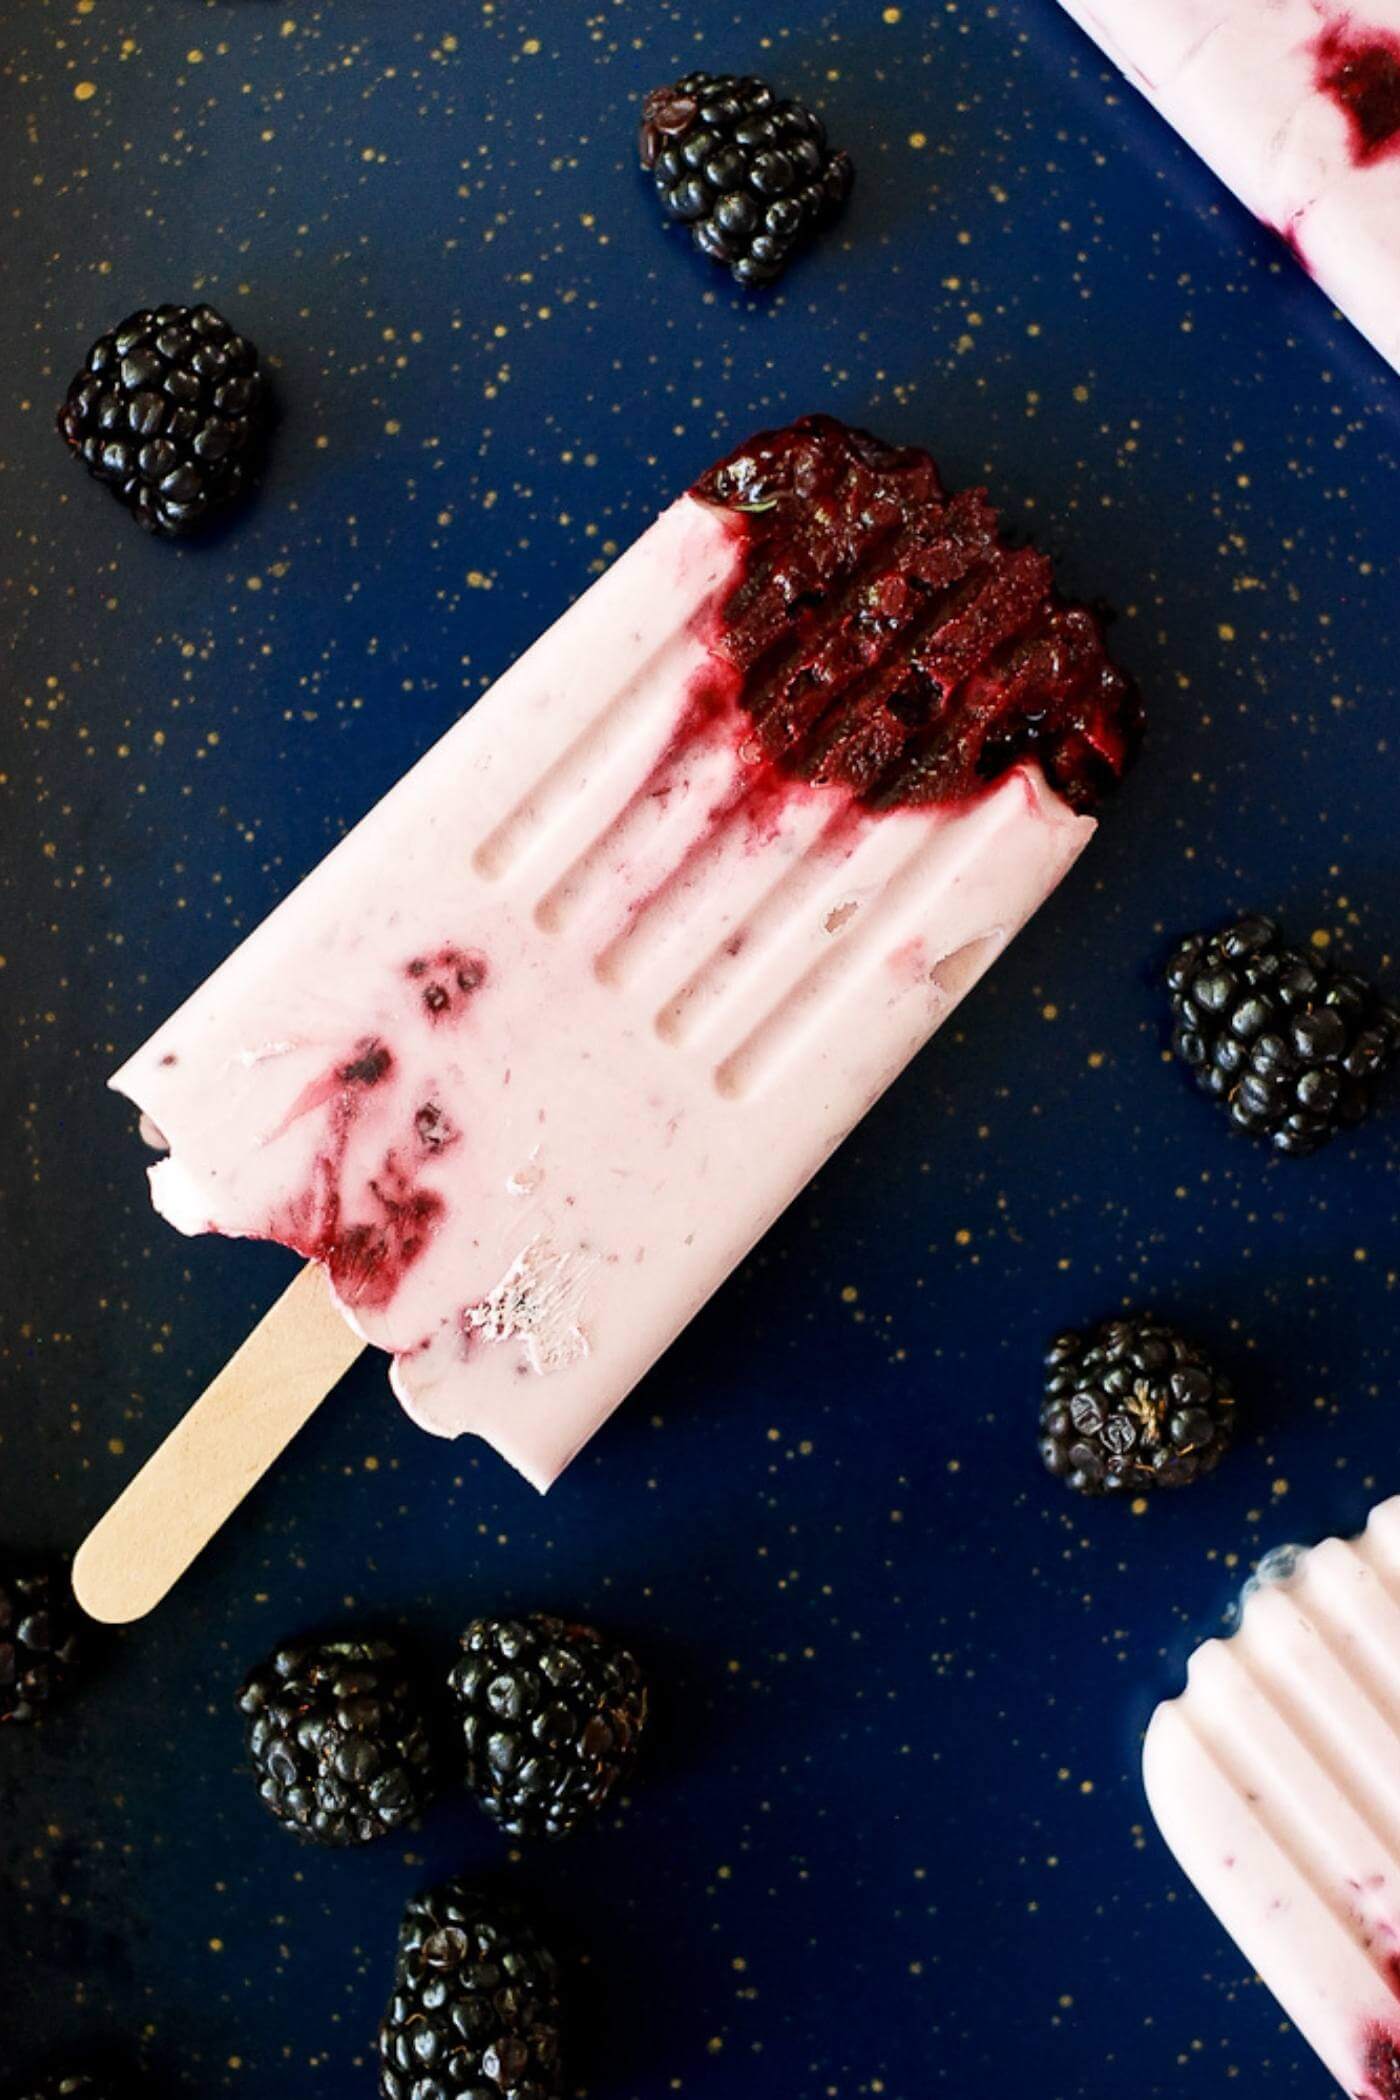 Blackberry Creamsicle on tray with blueberries.